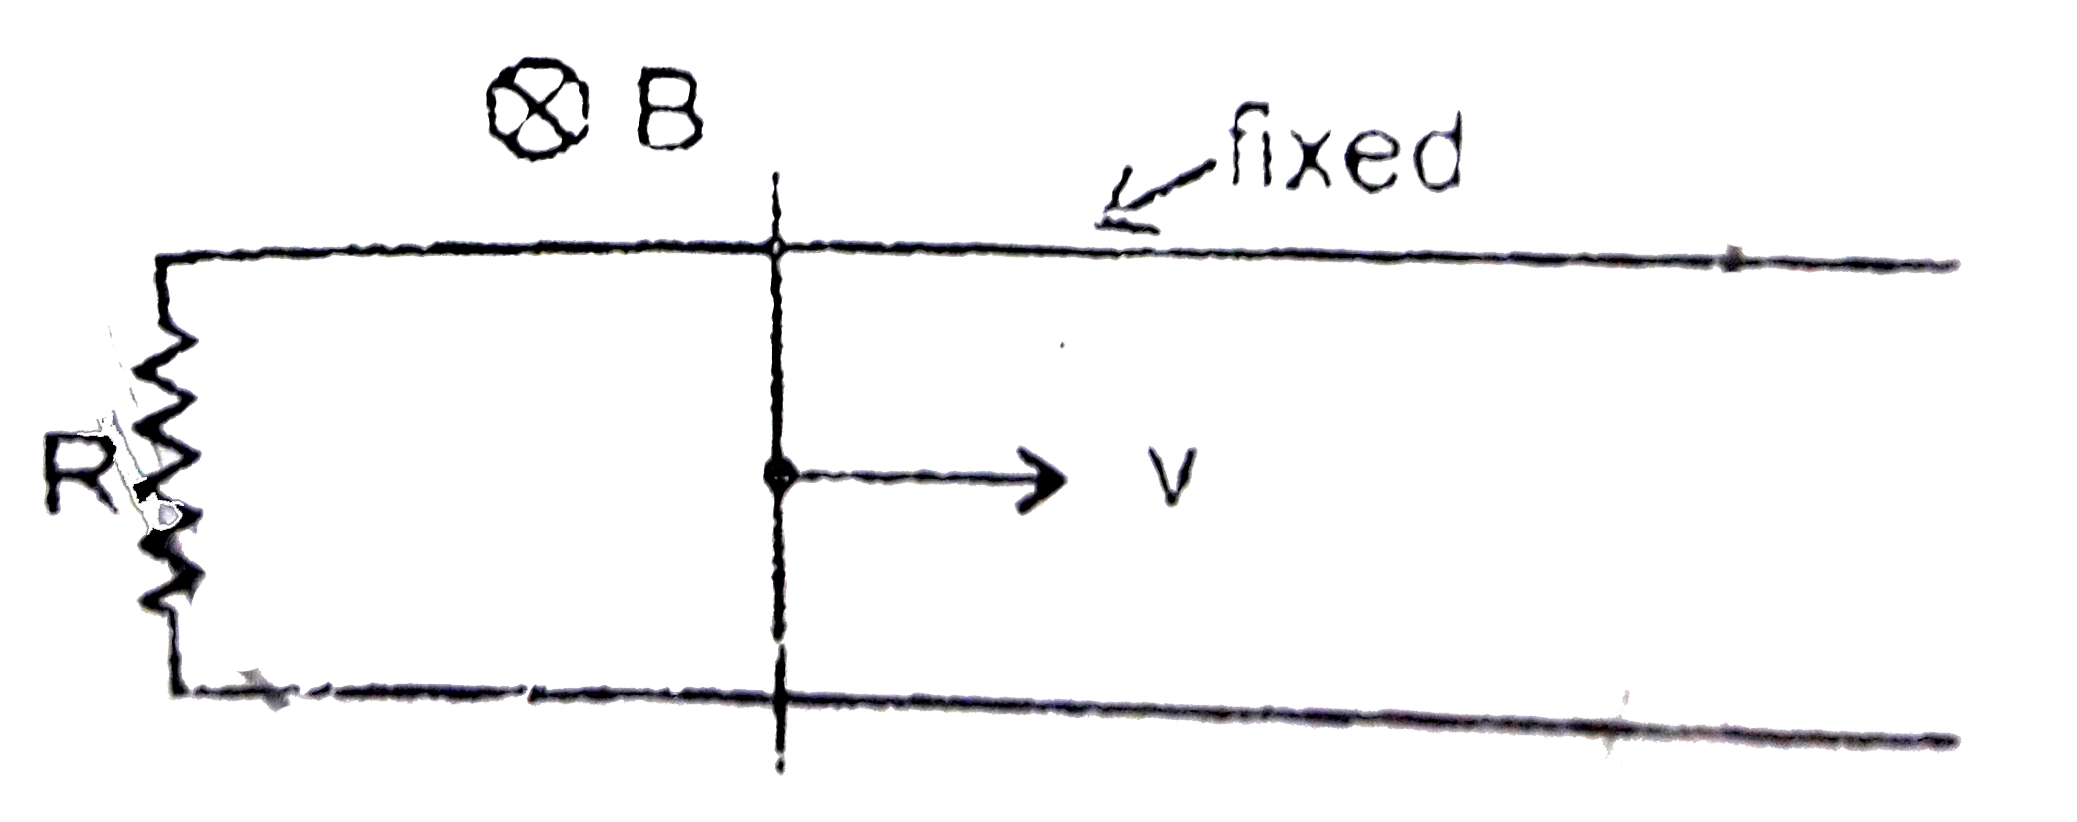 A resistance R is connected between the two ends of the parallel smooth conducting rails.A conducting rod lies on these fixed horizontal rails and a uniform constant magnetic field B exists perpendicular to the plane of the rails as shown in the figure.If the rod is given a velocity v and released as shown in figure, it will stop after some time, which option are correct: